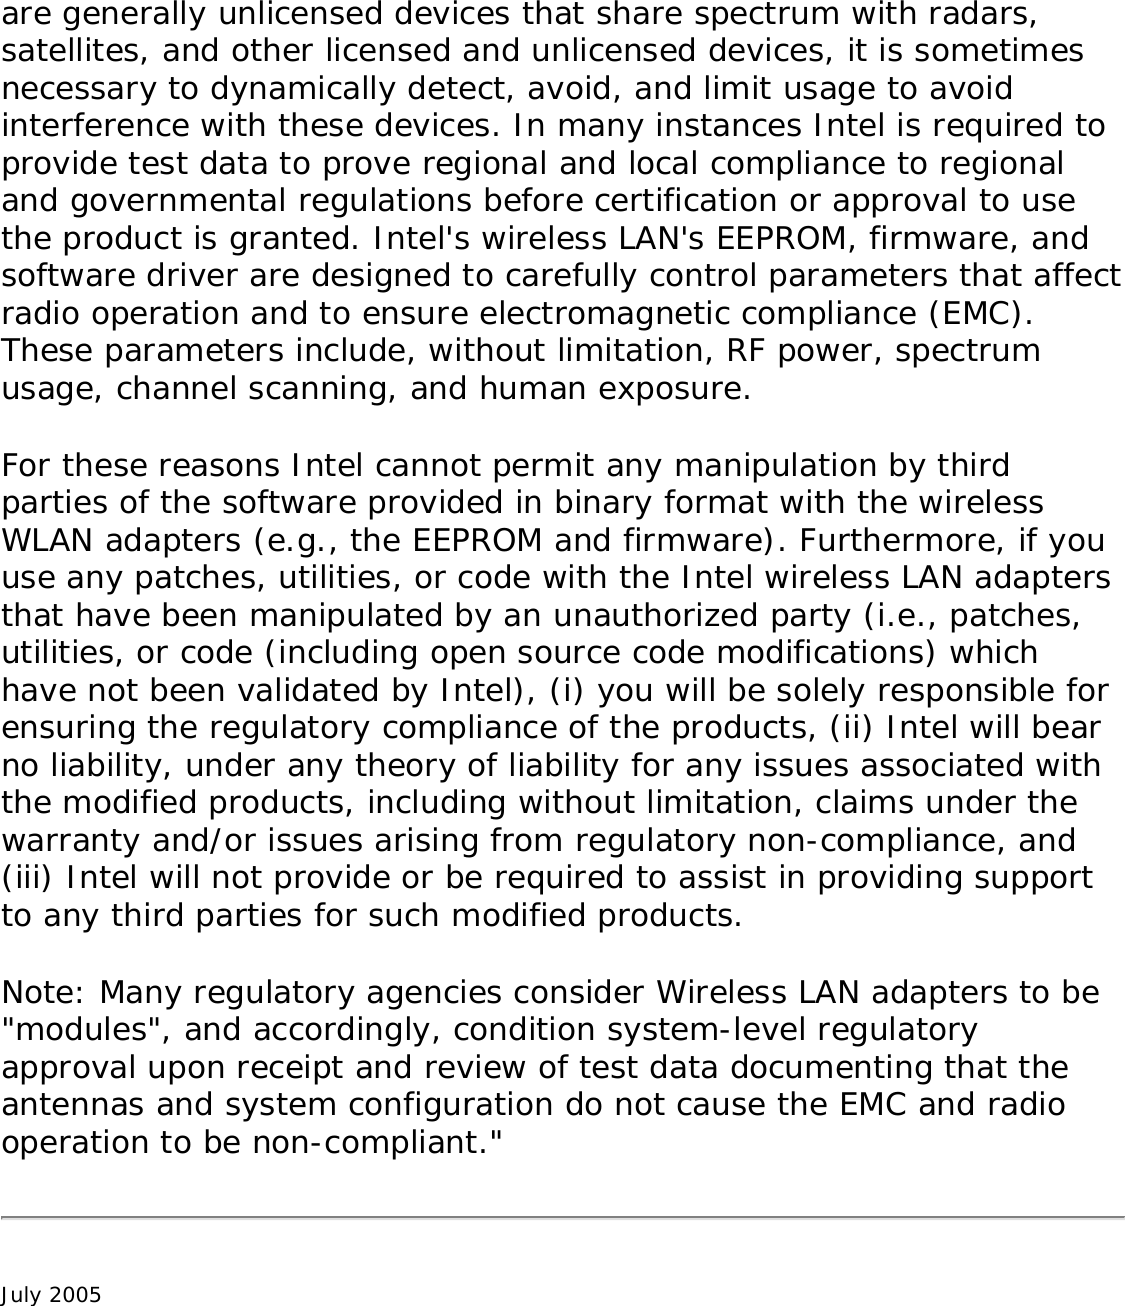 are generally unlicensed devices that share spectrum with radars, satellites, and other licensed and unlicensed devices, it is sometimes necessary to dynamically detect, avoid, and limit usage to avoid interference with these devices. In many instances Intel is required to provide test data to prove regional and local compliance to regional and governmental regulations before certification or approval to use the product is granted. Intel&apos;s wireless LAN&apos;s EEPROM, firmware, and software driver are designed to carefully control parameters that affect radio operation and to ensure electromagnetic compliance (EMC). These parameters include, without limitation, RF power, spectrum usage, channel scanning, and human exposure. For these reasons Intel cannot permit any manipulation by third parties of the software provided in binary format with the wireless WLAN adapters (e.g., the EEPROM and firmware). Furthermore, if you use any patches, utilities, or code with the Intel wireless LAN adapters that have been manipulated by an unauthorized party (i.e., patches, utilities, or code (including open source code modifications) which have not been validated by Intel), (i) you will be solely responsible for ensuring the regulatory compliance of the products, (ii) Intel will bear no liability, under any theory of liability for any issues associated with the modified products, including without limitation, claims under the warranty and/or issues arising from regulatory non-compliance, and (iii) Intel will not provide or be required to assist in providing support to any third parties for such modified products. Note: Many regulatory agencies consider Wireless LAN adapters to be &quot;modules&quot;, and accordingly, condition system-level regulatory approval upon receipt and review of test data documenting that the antennas and system configuration do not cause the EMC and radio operation to be non-compliant.&quot;July 2005 